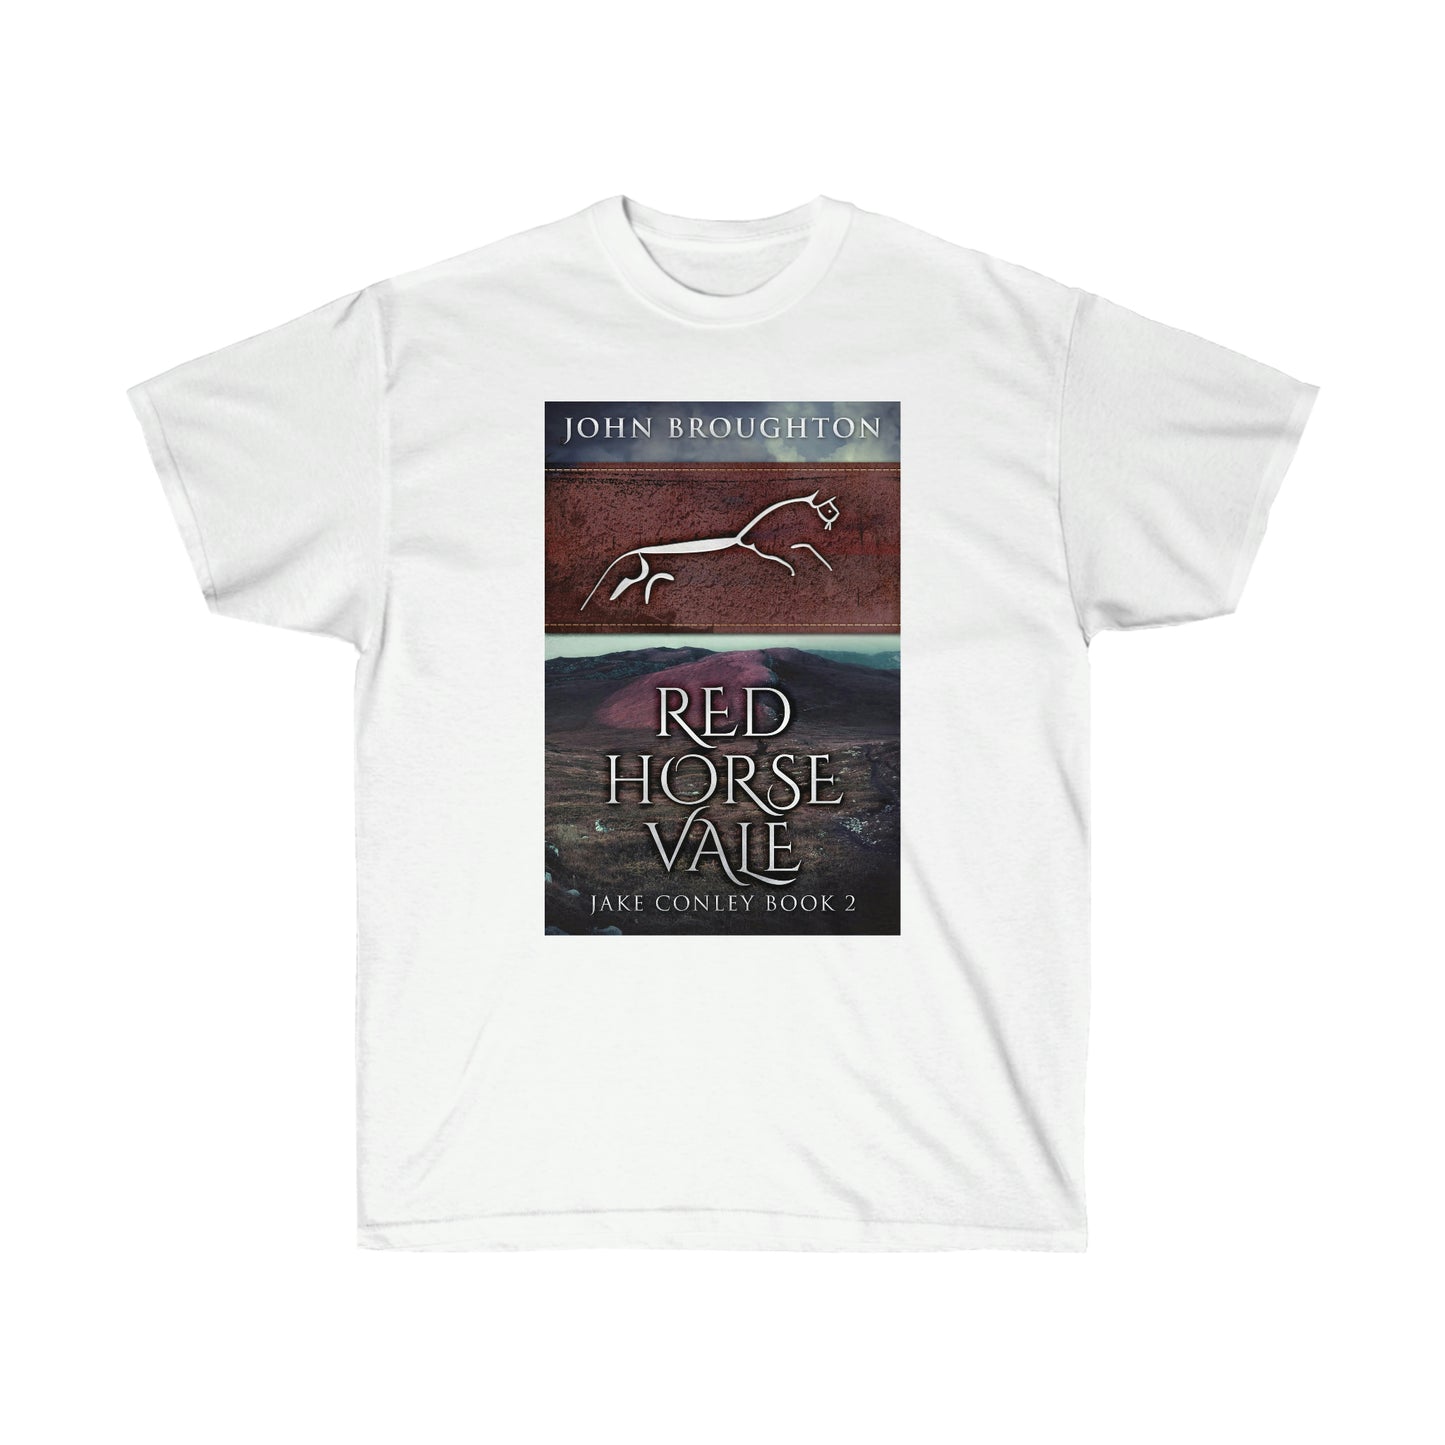 Red Horse Vale - Unisex T-Shirt